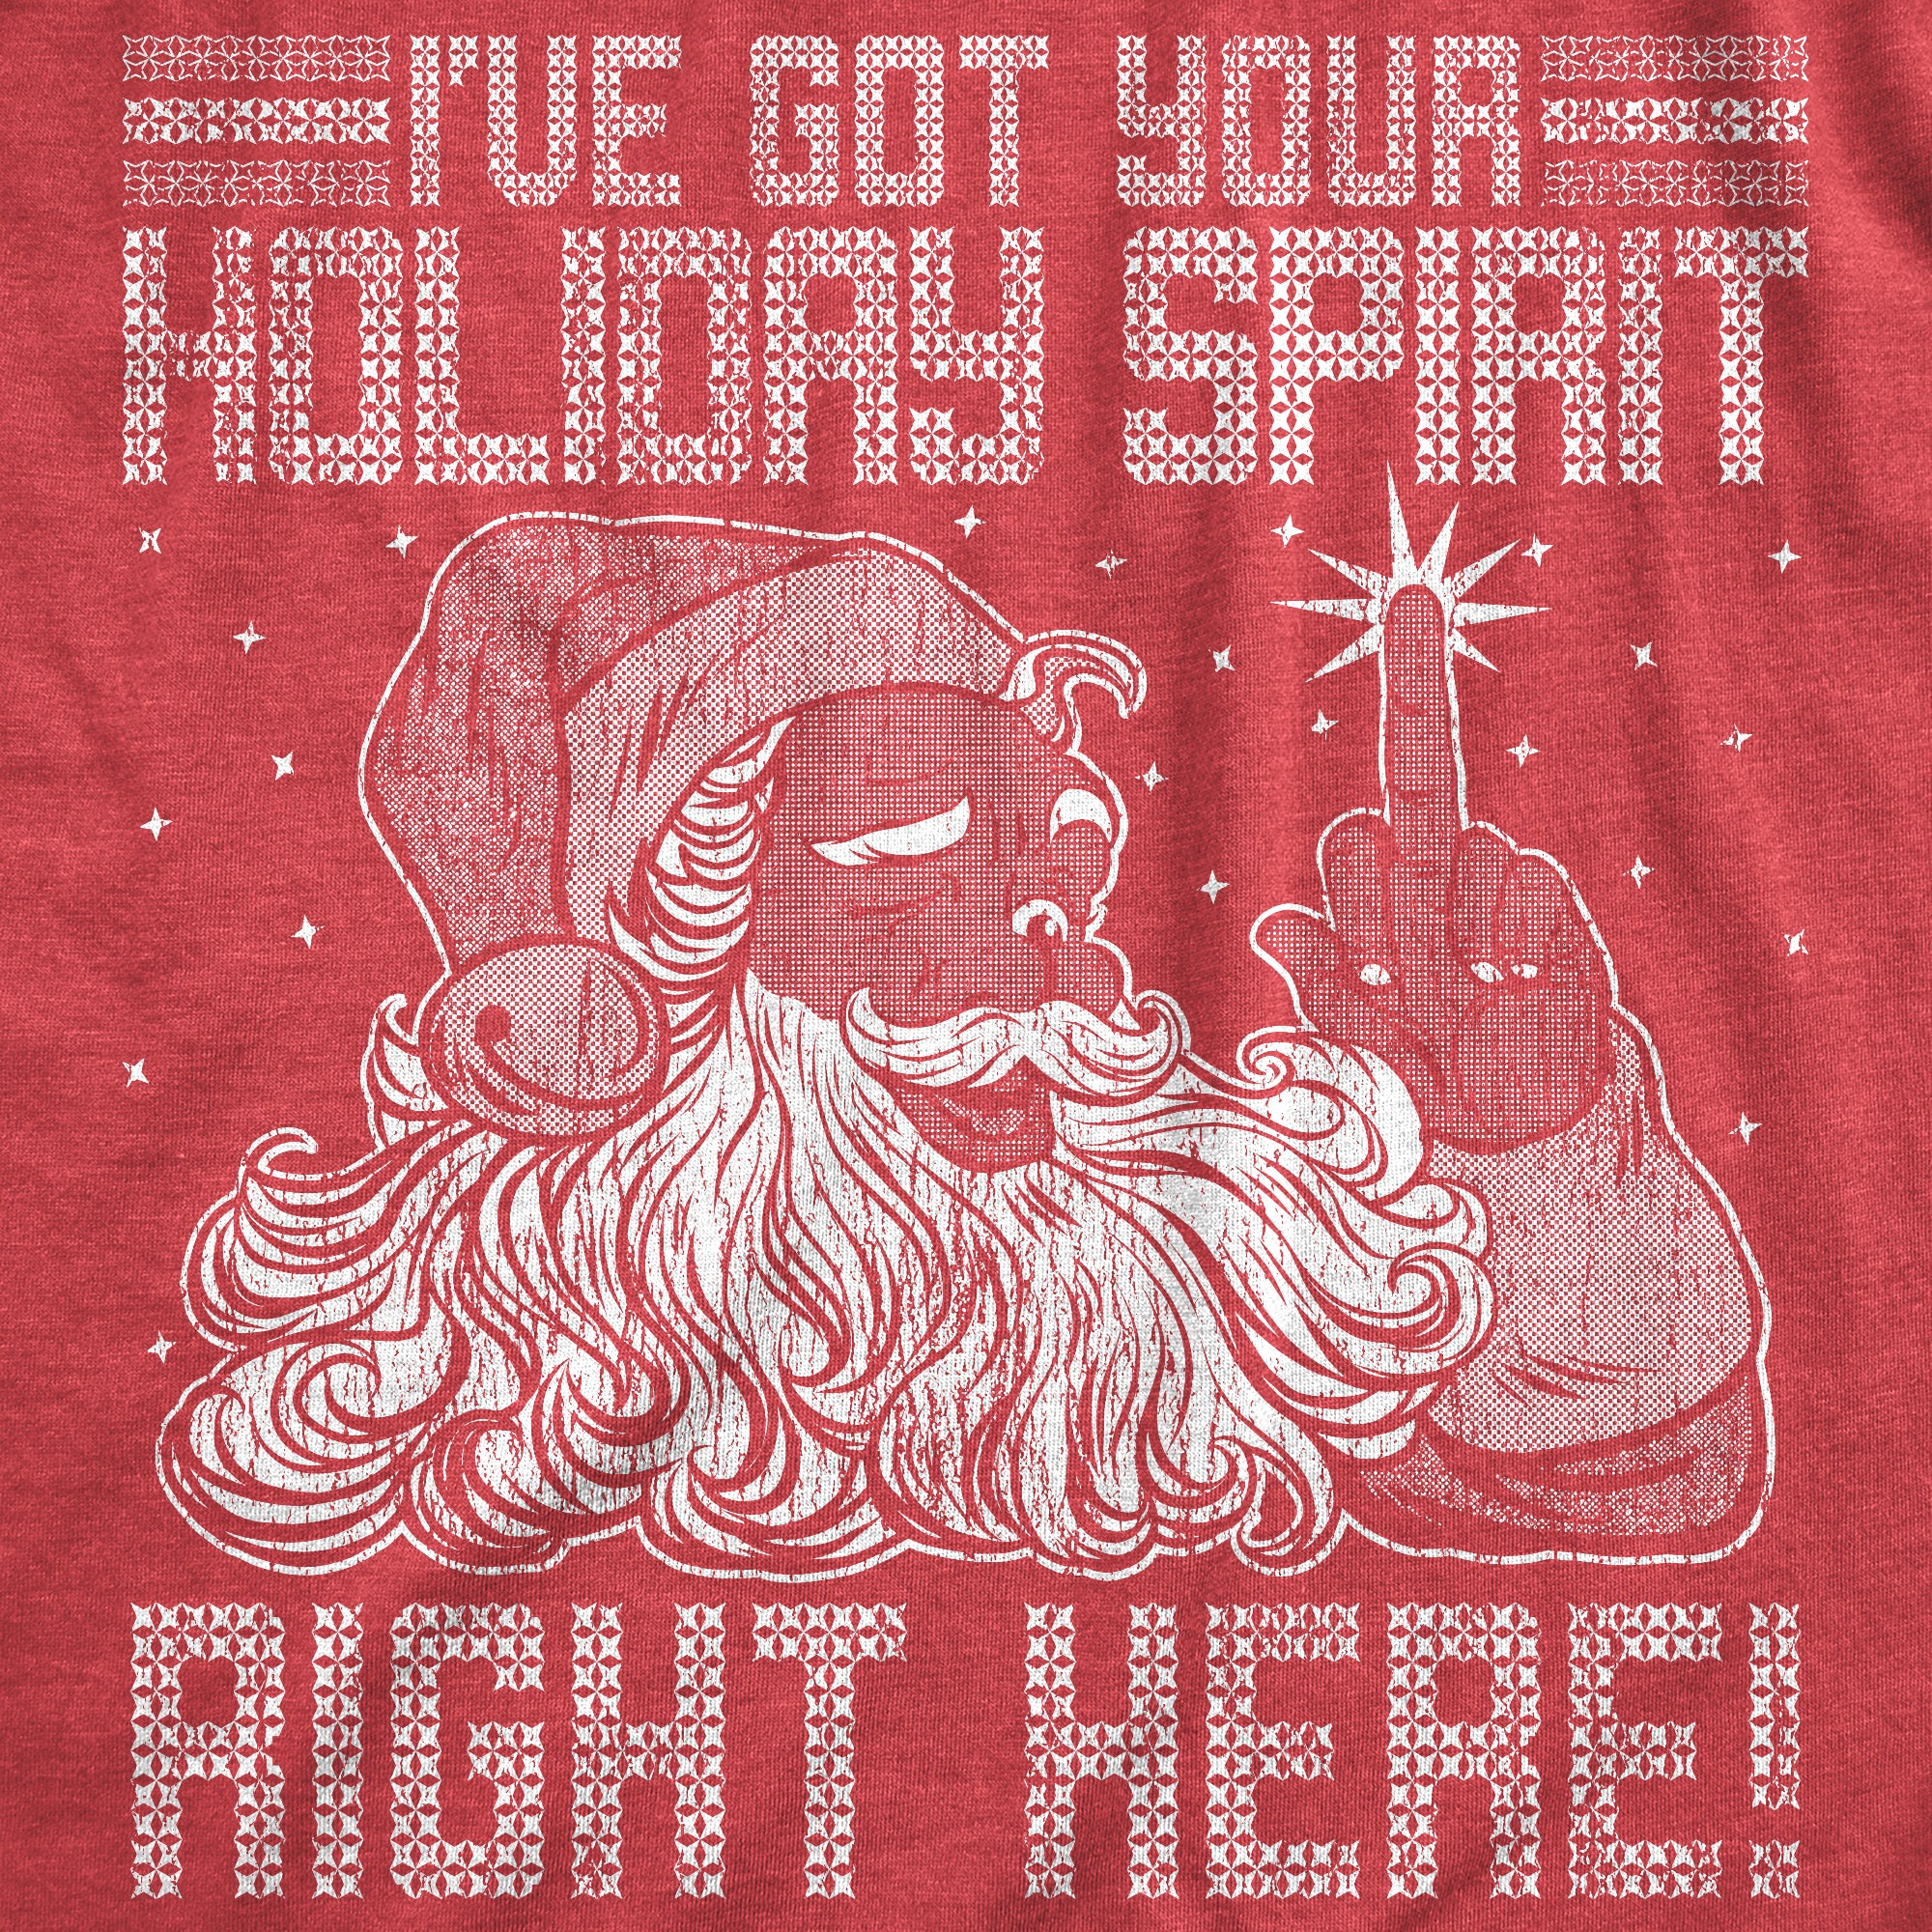 Funny Heather Red - SPIRIT Ive Got Your Holiday Spirit Right Here Womens T Shirt Nerdy Christmas Sarcastic Tee